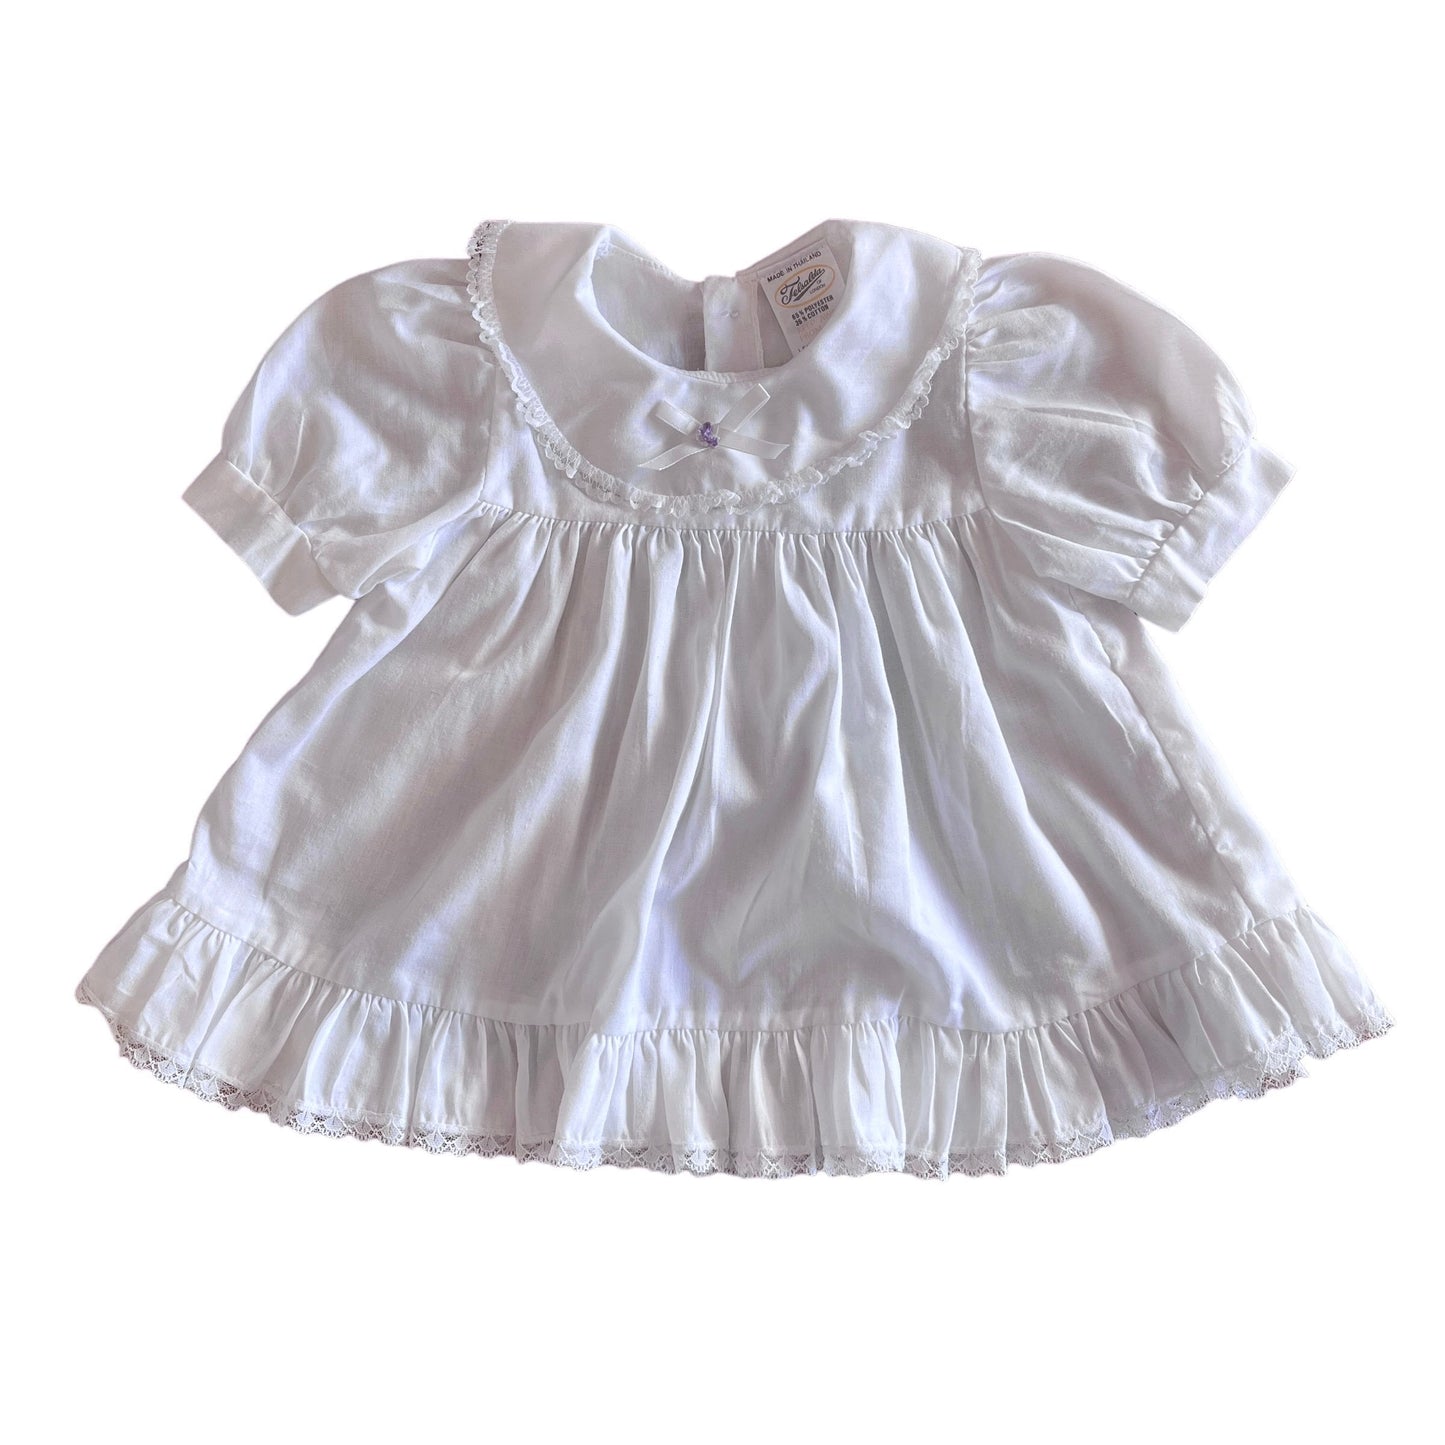 1980s Frilled White Dress / 9-12 Months